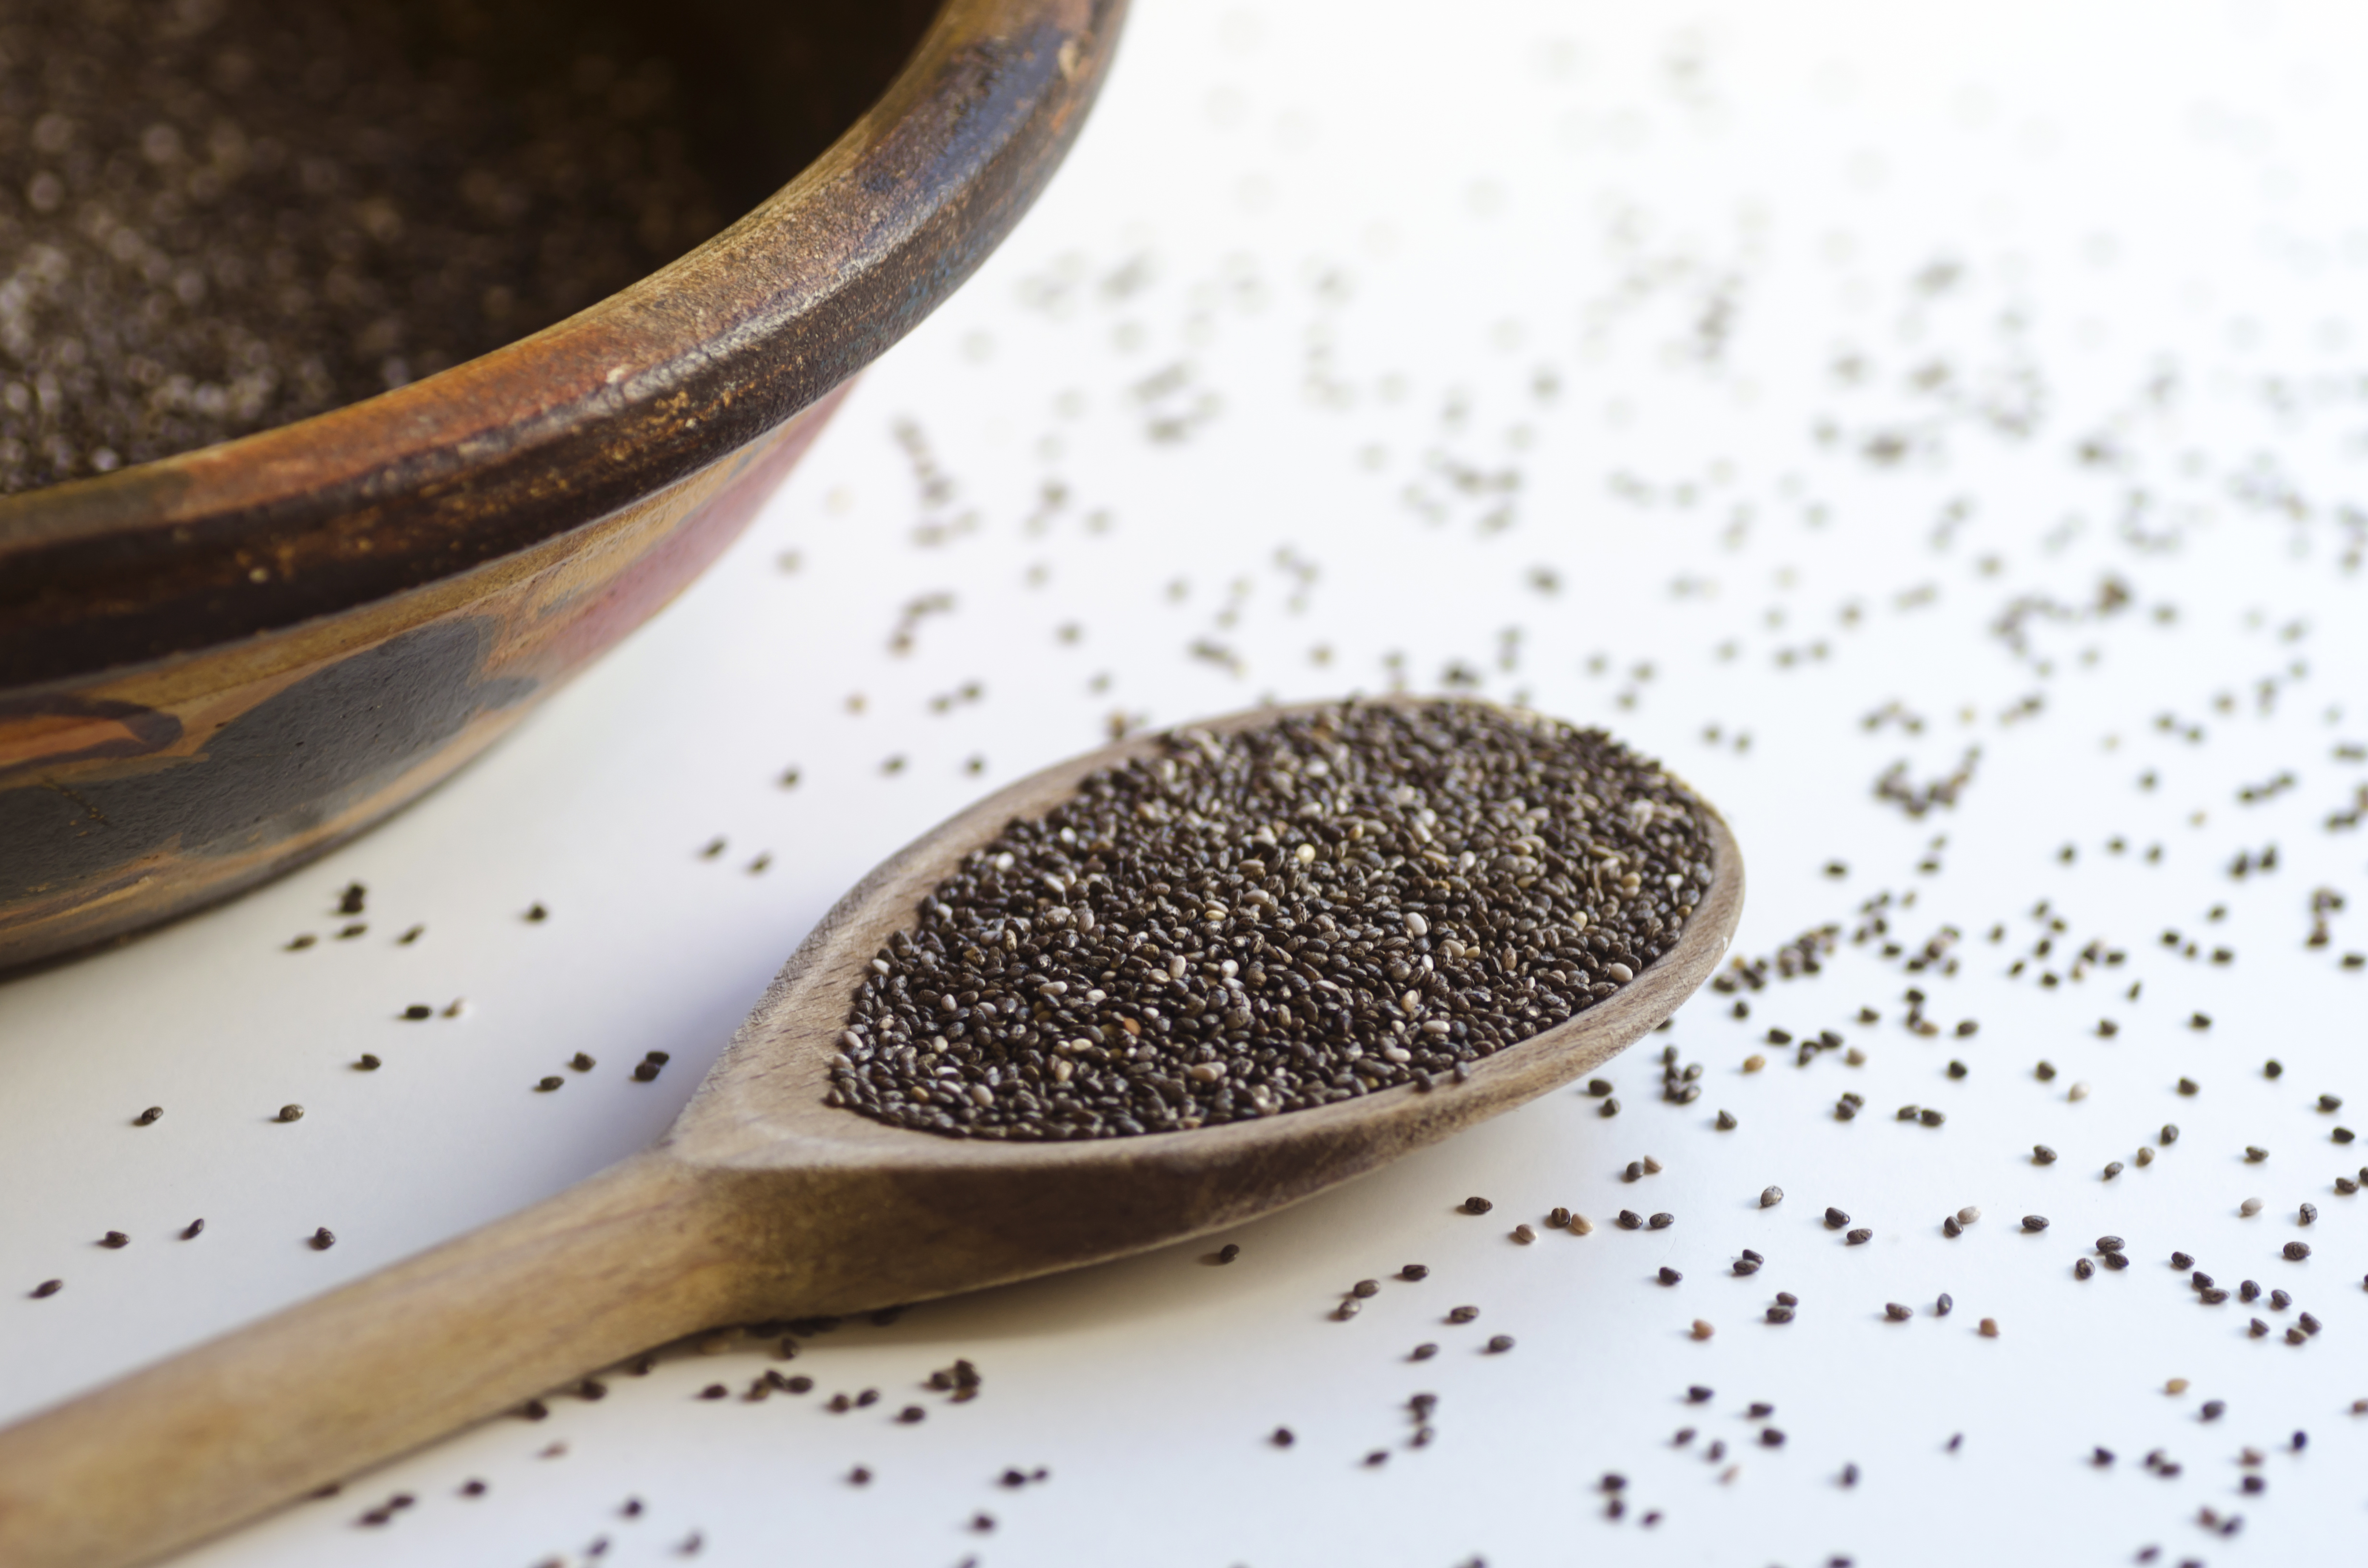 Chia Seeds and Weight Loss: Dietitians Explain the Connection